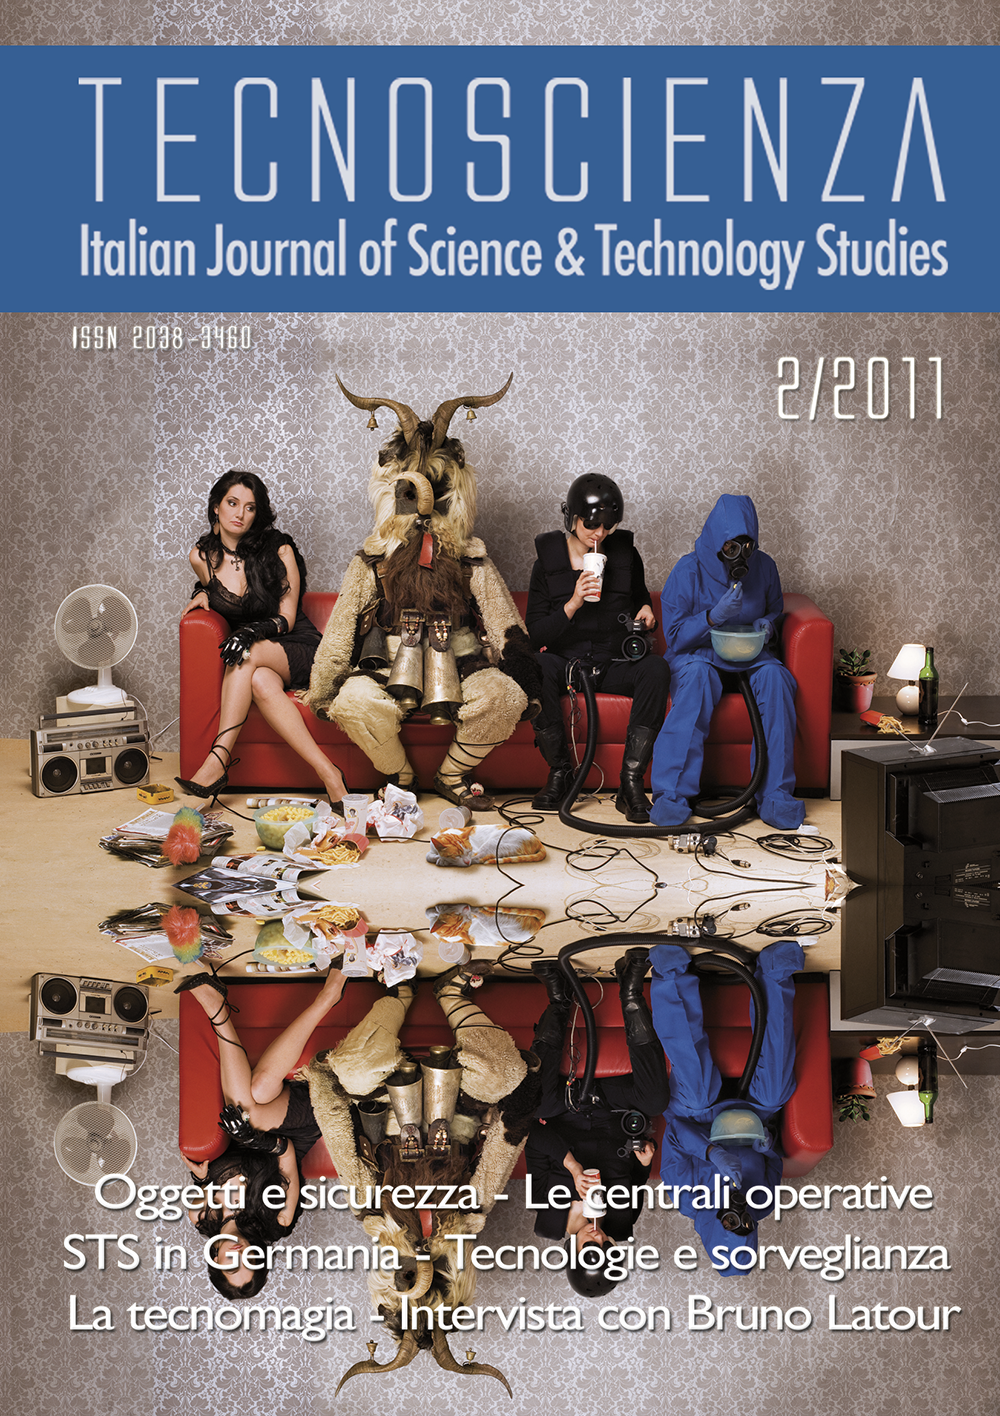 “I Am Whatever You Want Me To Be”, by Daniela Kostova. Cover of Tecnoscienza number 4 (2nd Issue, Year 2011)